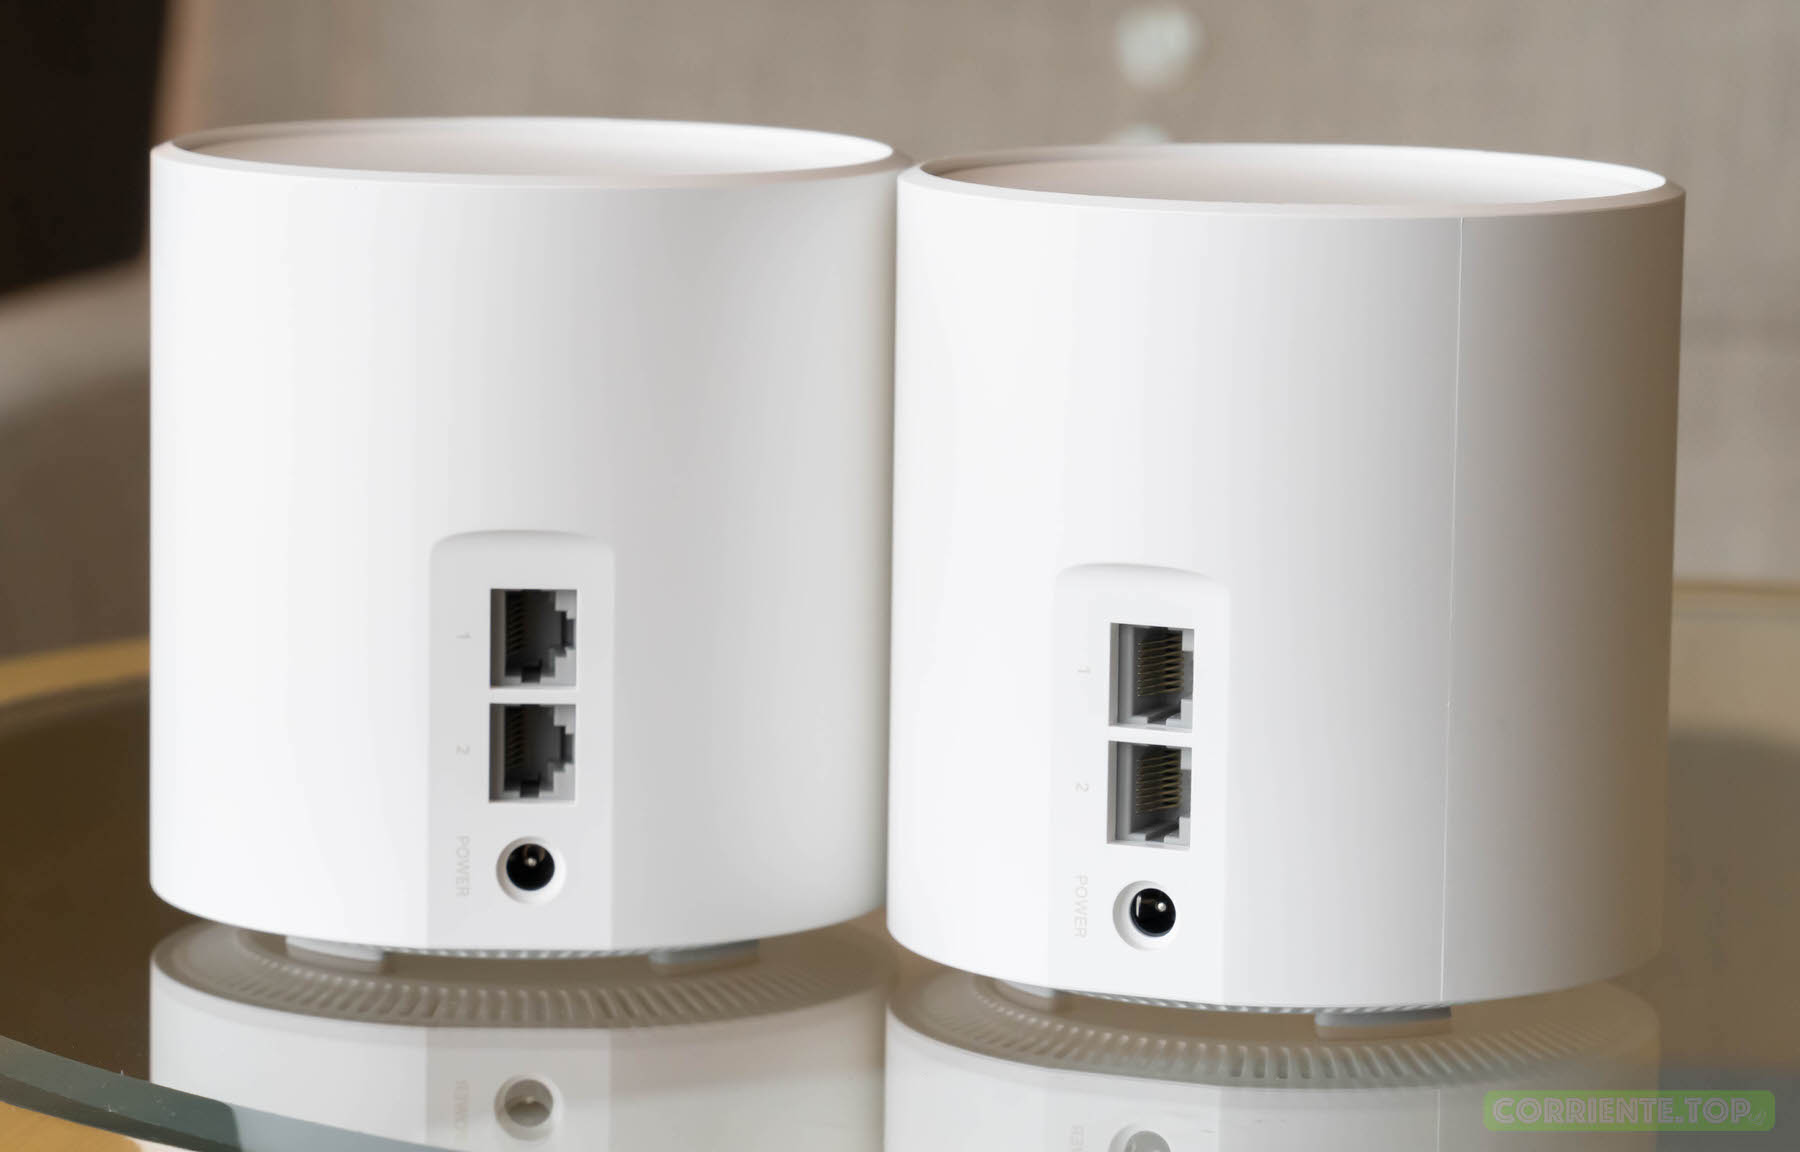 TP-Link Deco X20 レビュー | Wi-Fi 6に対応した低価格メッシュWi-Fiルーター | CoRRiENTE.top